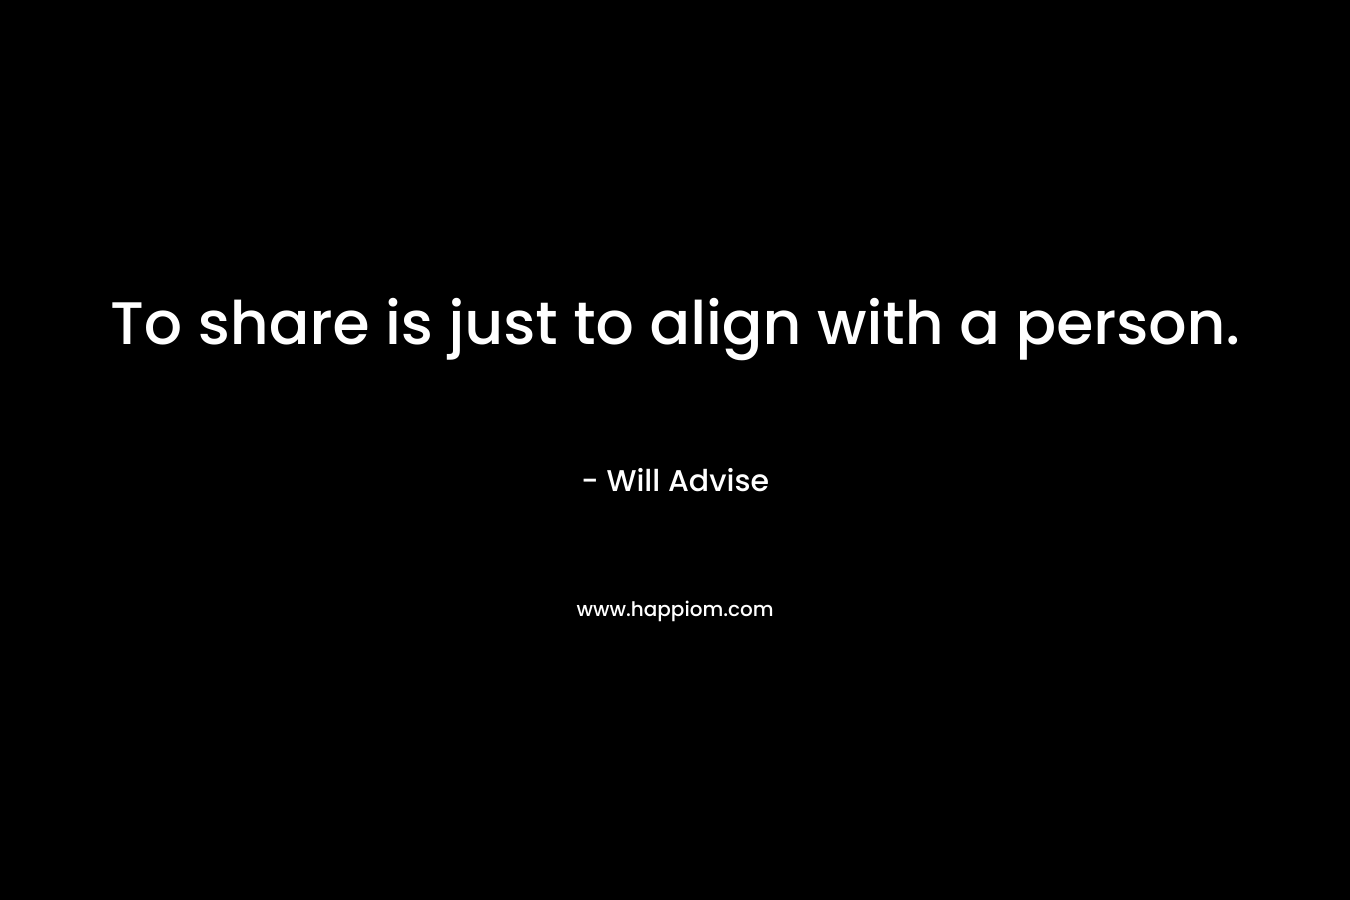 To share is just to align with a person. – Will Advise